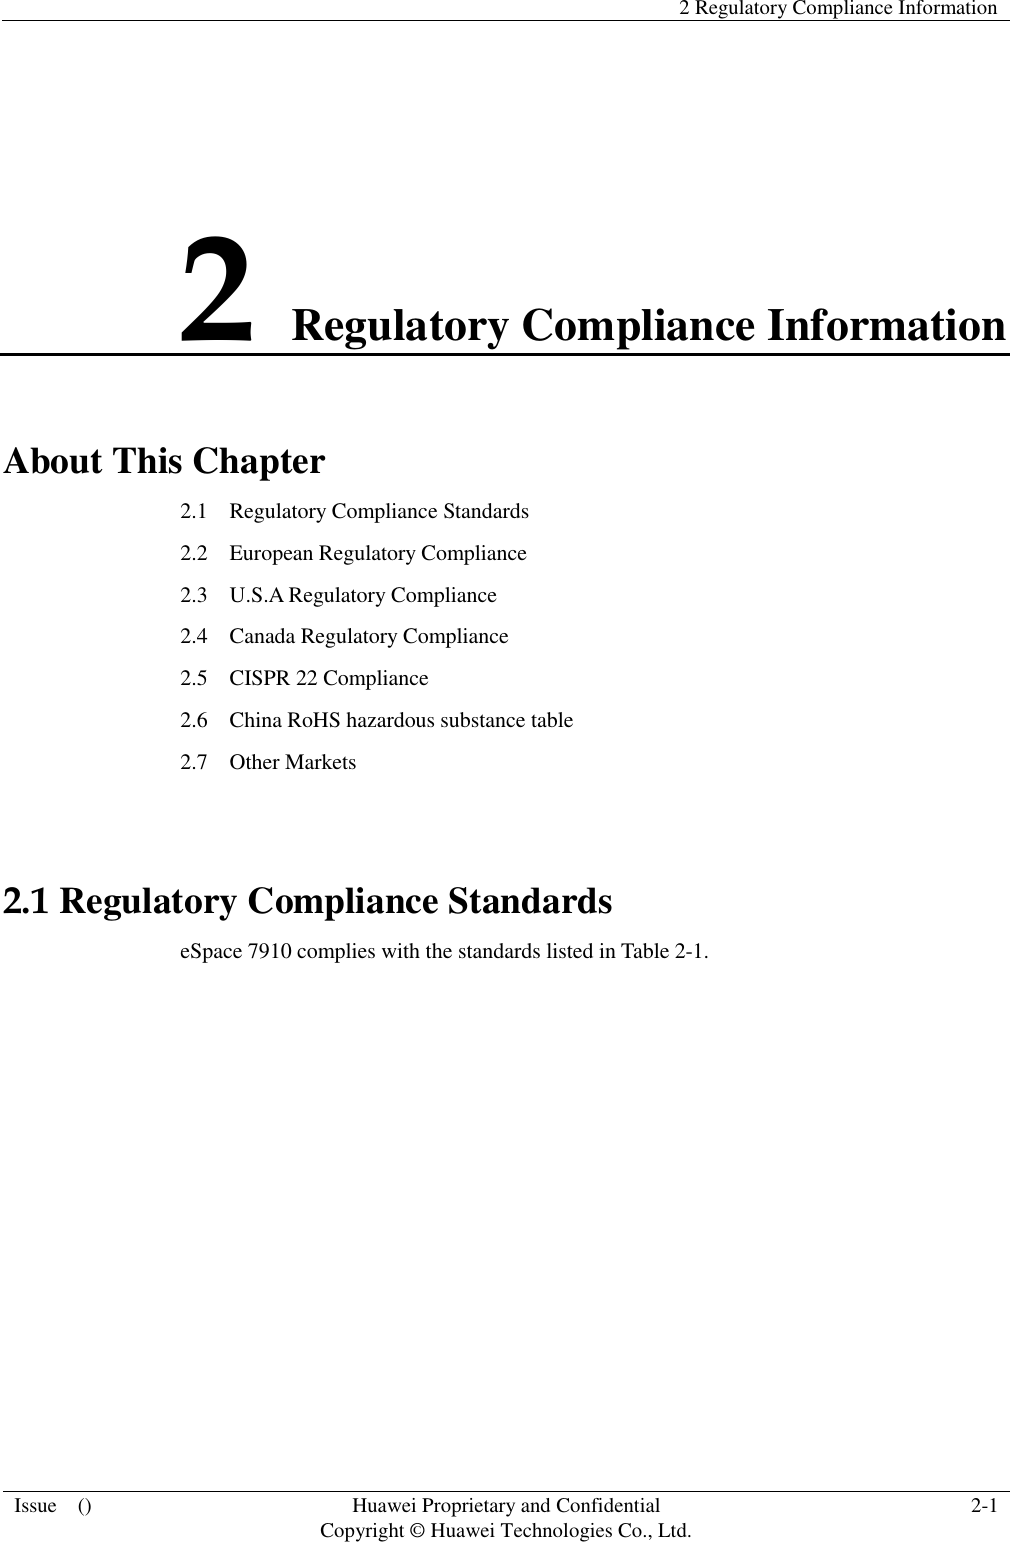   2 Regulatory Compliance Information  Issue    () Huawei Proprietary and Confidential                                     Copyright © Huawei Technologies Co., Ltd. 2-1  2 Regulatory Compliance Information About This Chapter 2.1    Regulatory Compliance Standards 2.2    European Regulatory Compliance 2.3    U.S.A Regulatory Compliance 2.4    Canada Regulatory Compliance 2.5  CISPR 22 Compliance   2.6  China RoHS hazardous substance table   2.7  Other Markets  2.1 Regulatory Compliance Standards eSpace 7910 complies with the standards listed in Table 2-1. 